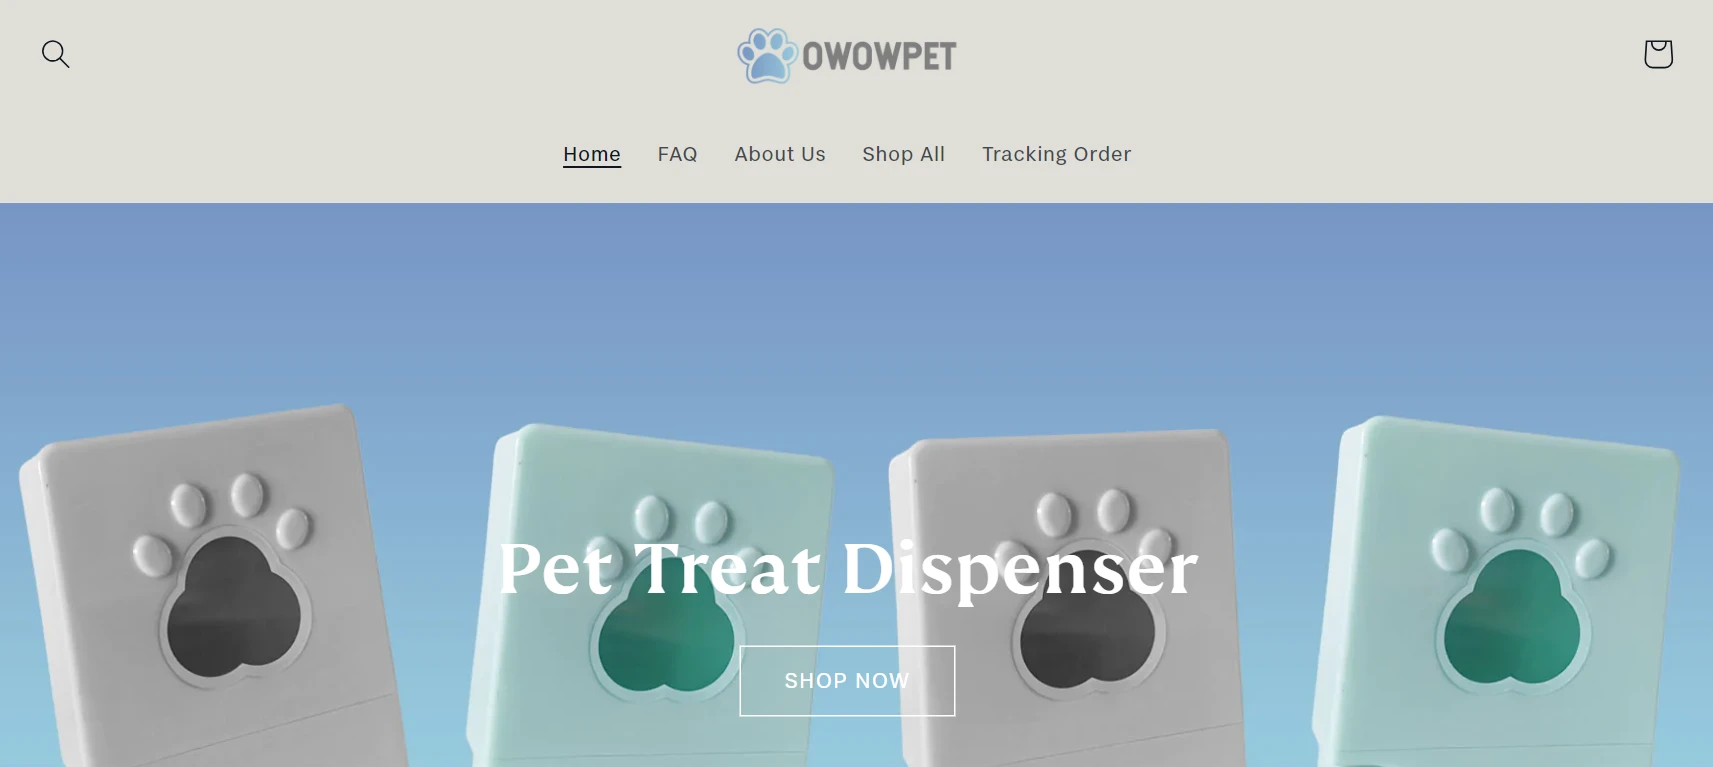 You are currently viewing OWowpet Review: Is OWowpet.com Legit or a Scam?